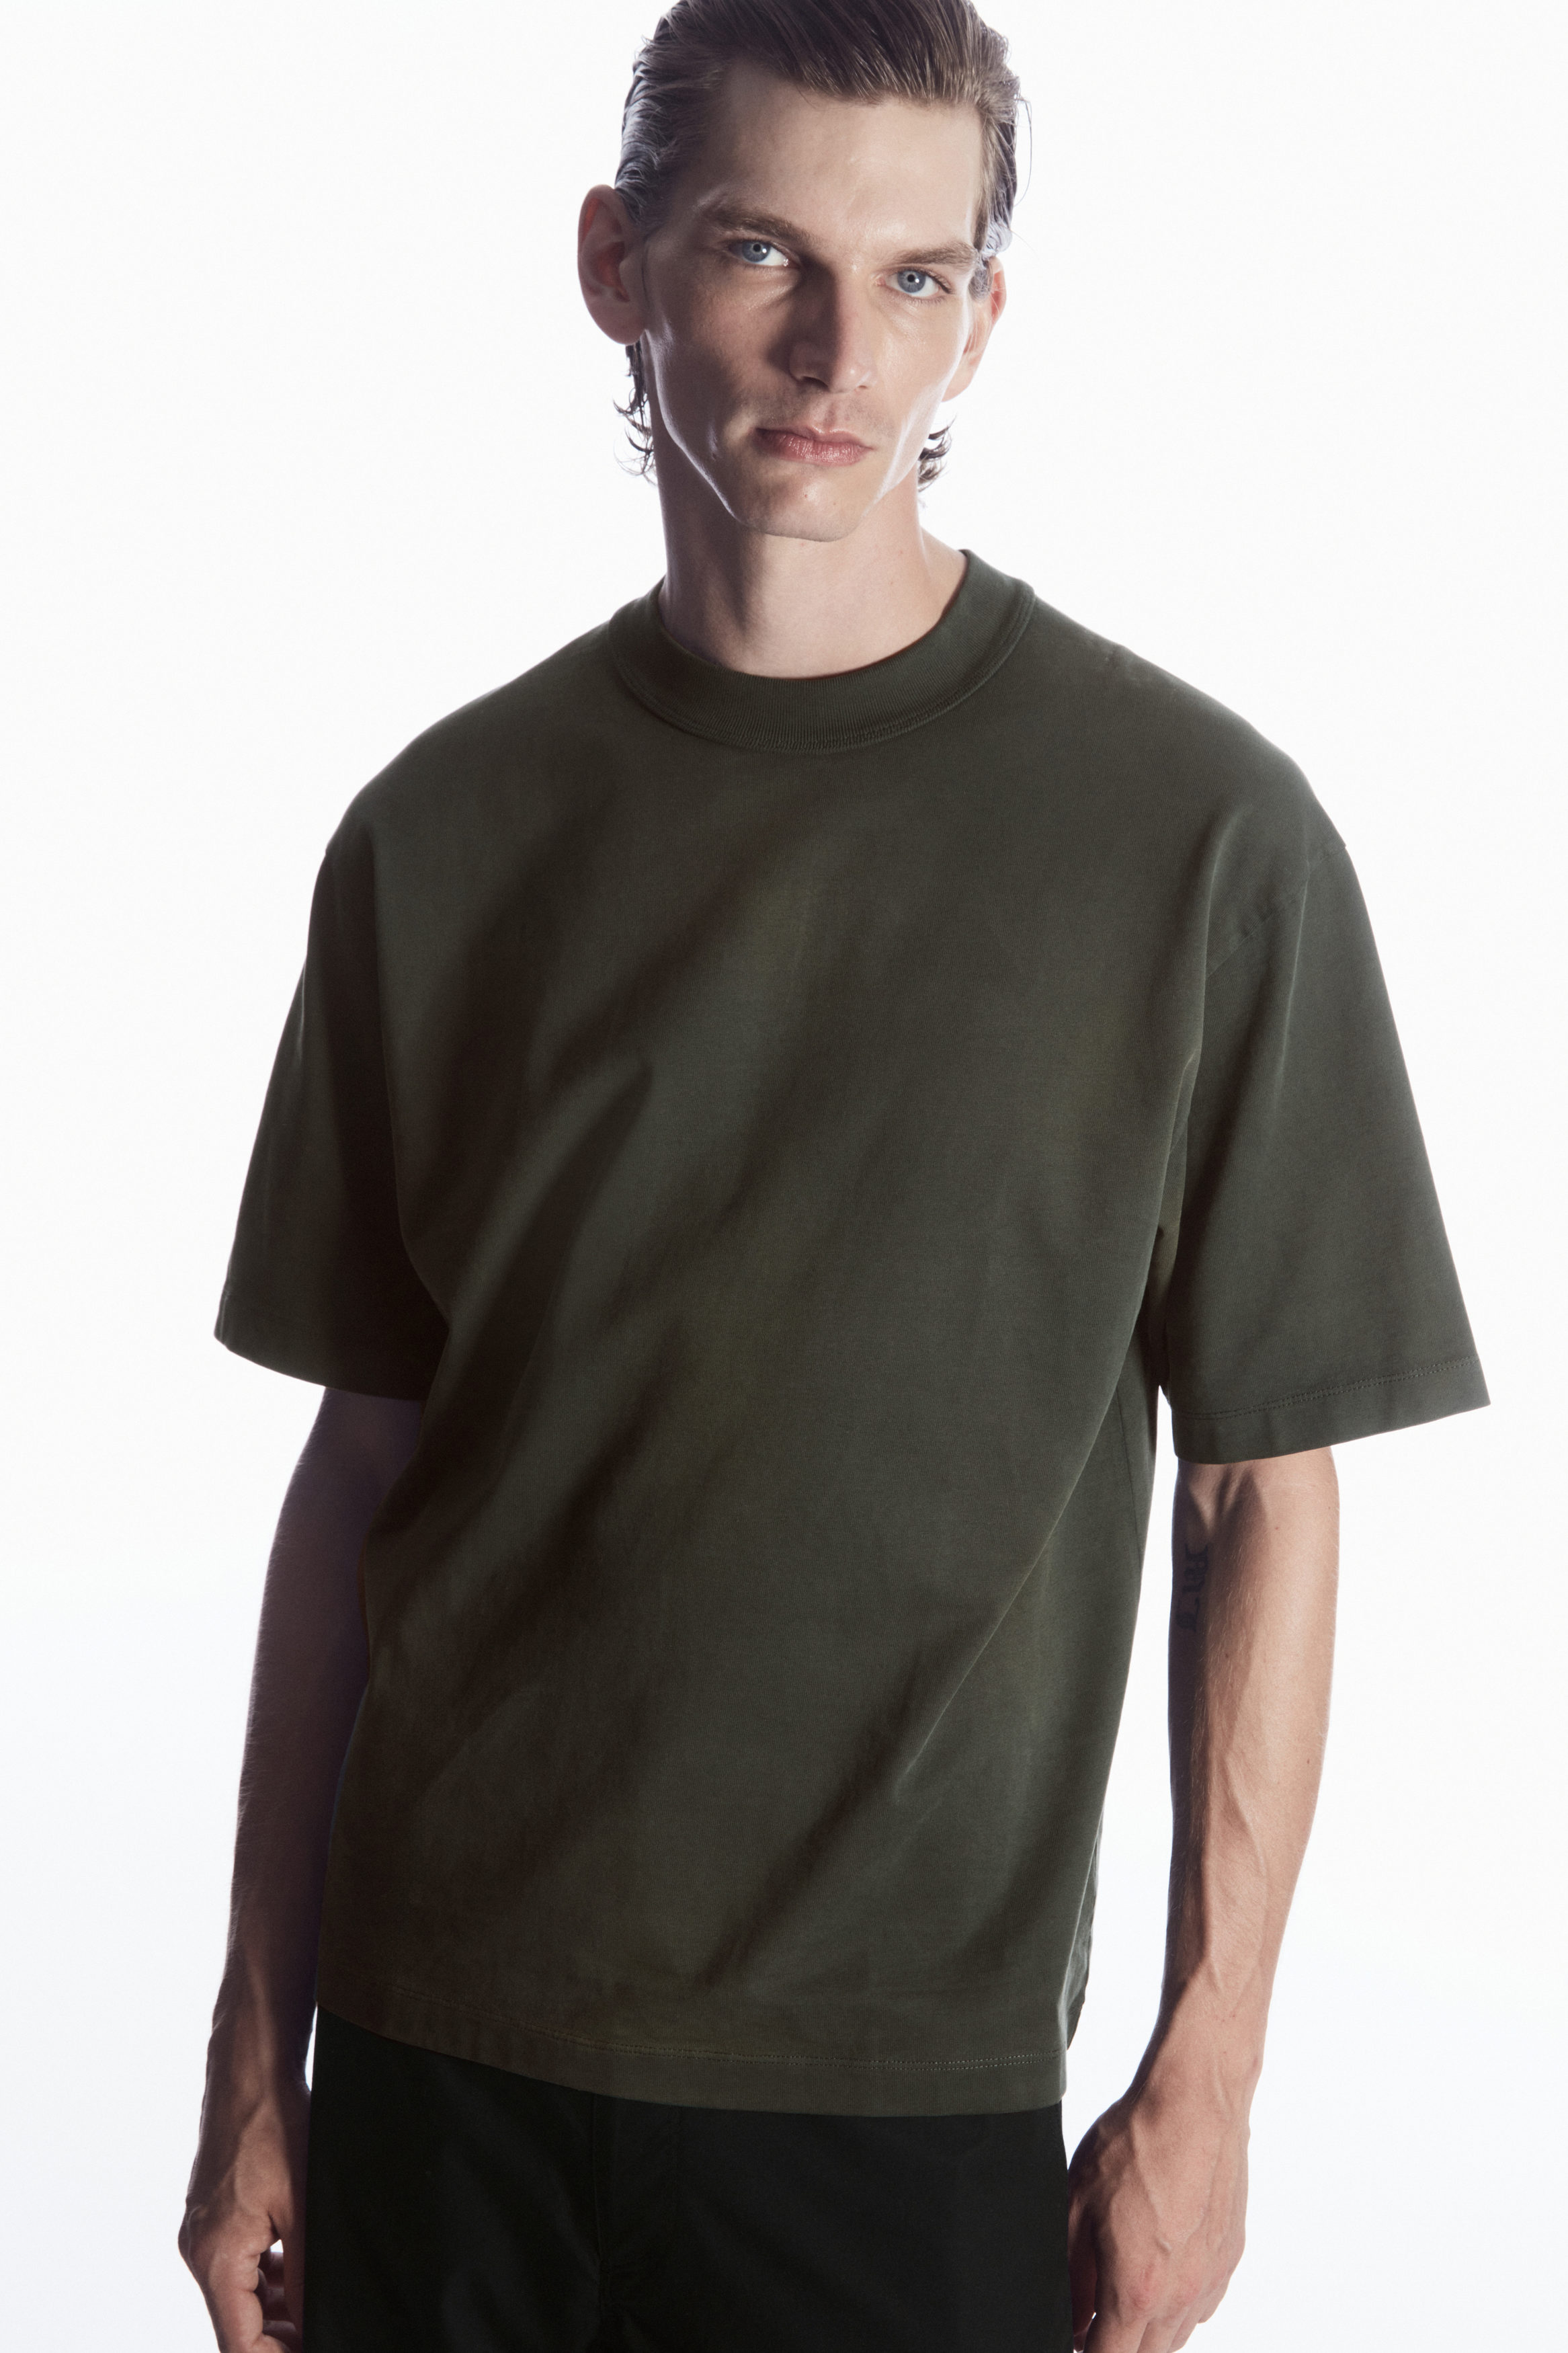 Oversized Mock Neck Tee BY230| Men's Plain cotton T-shirt with dropped  shoulders